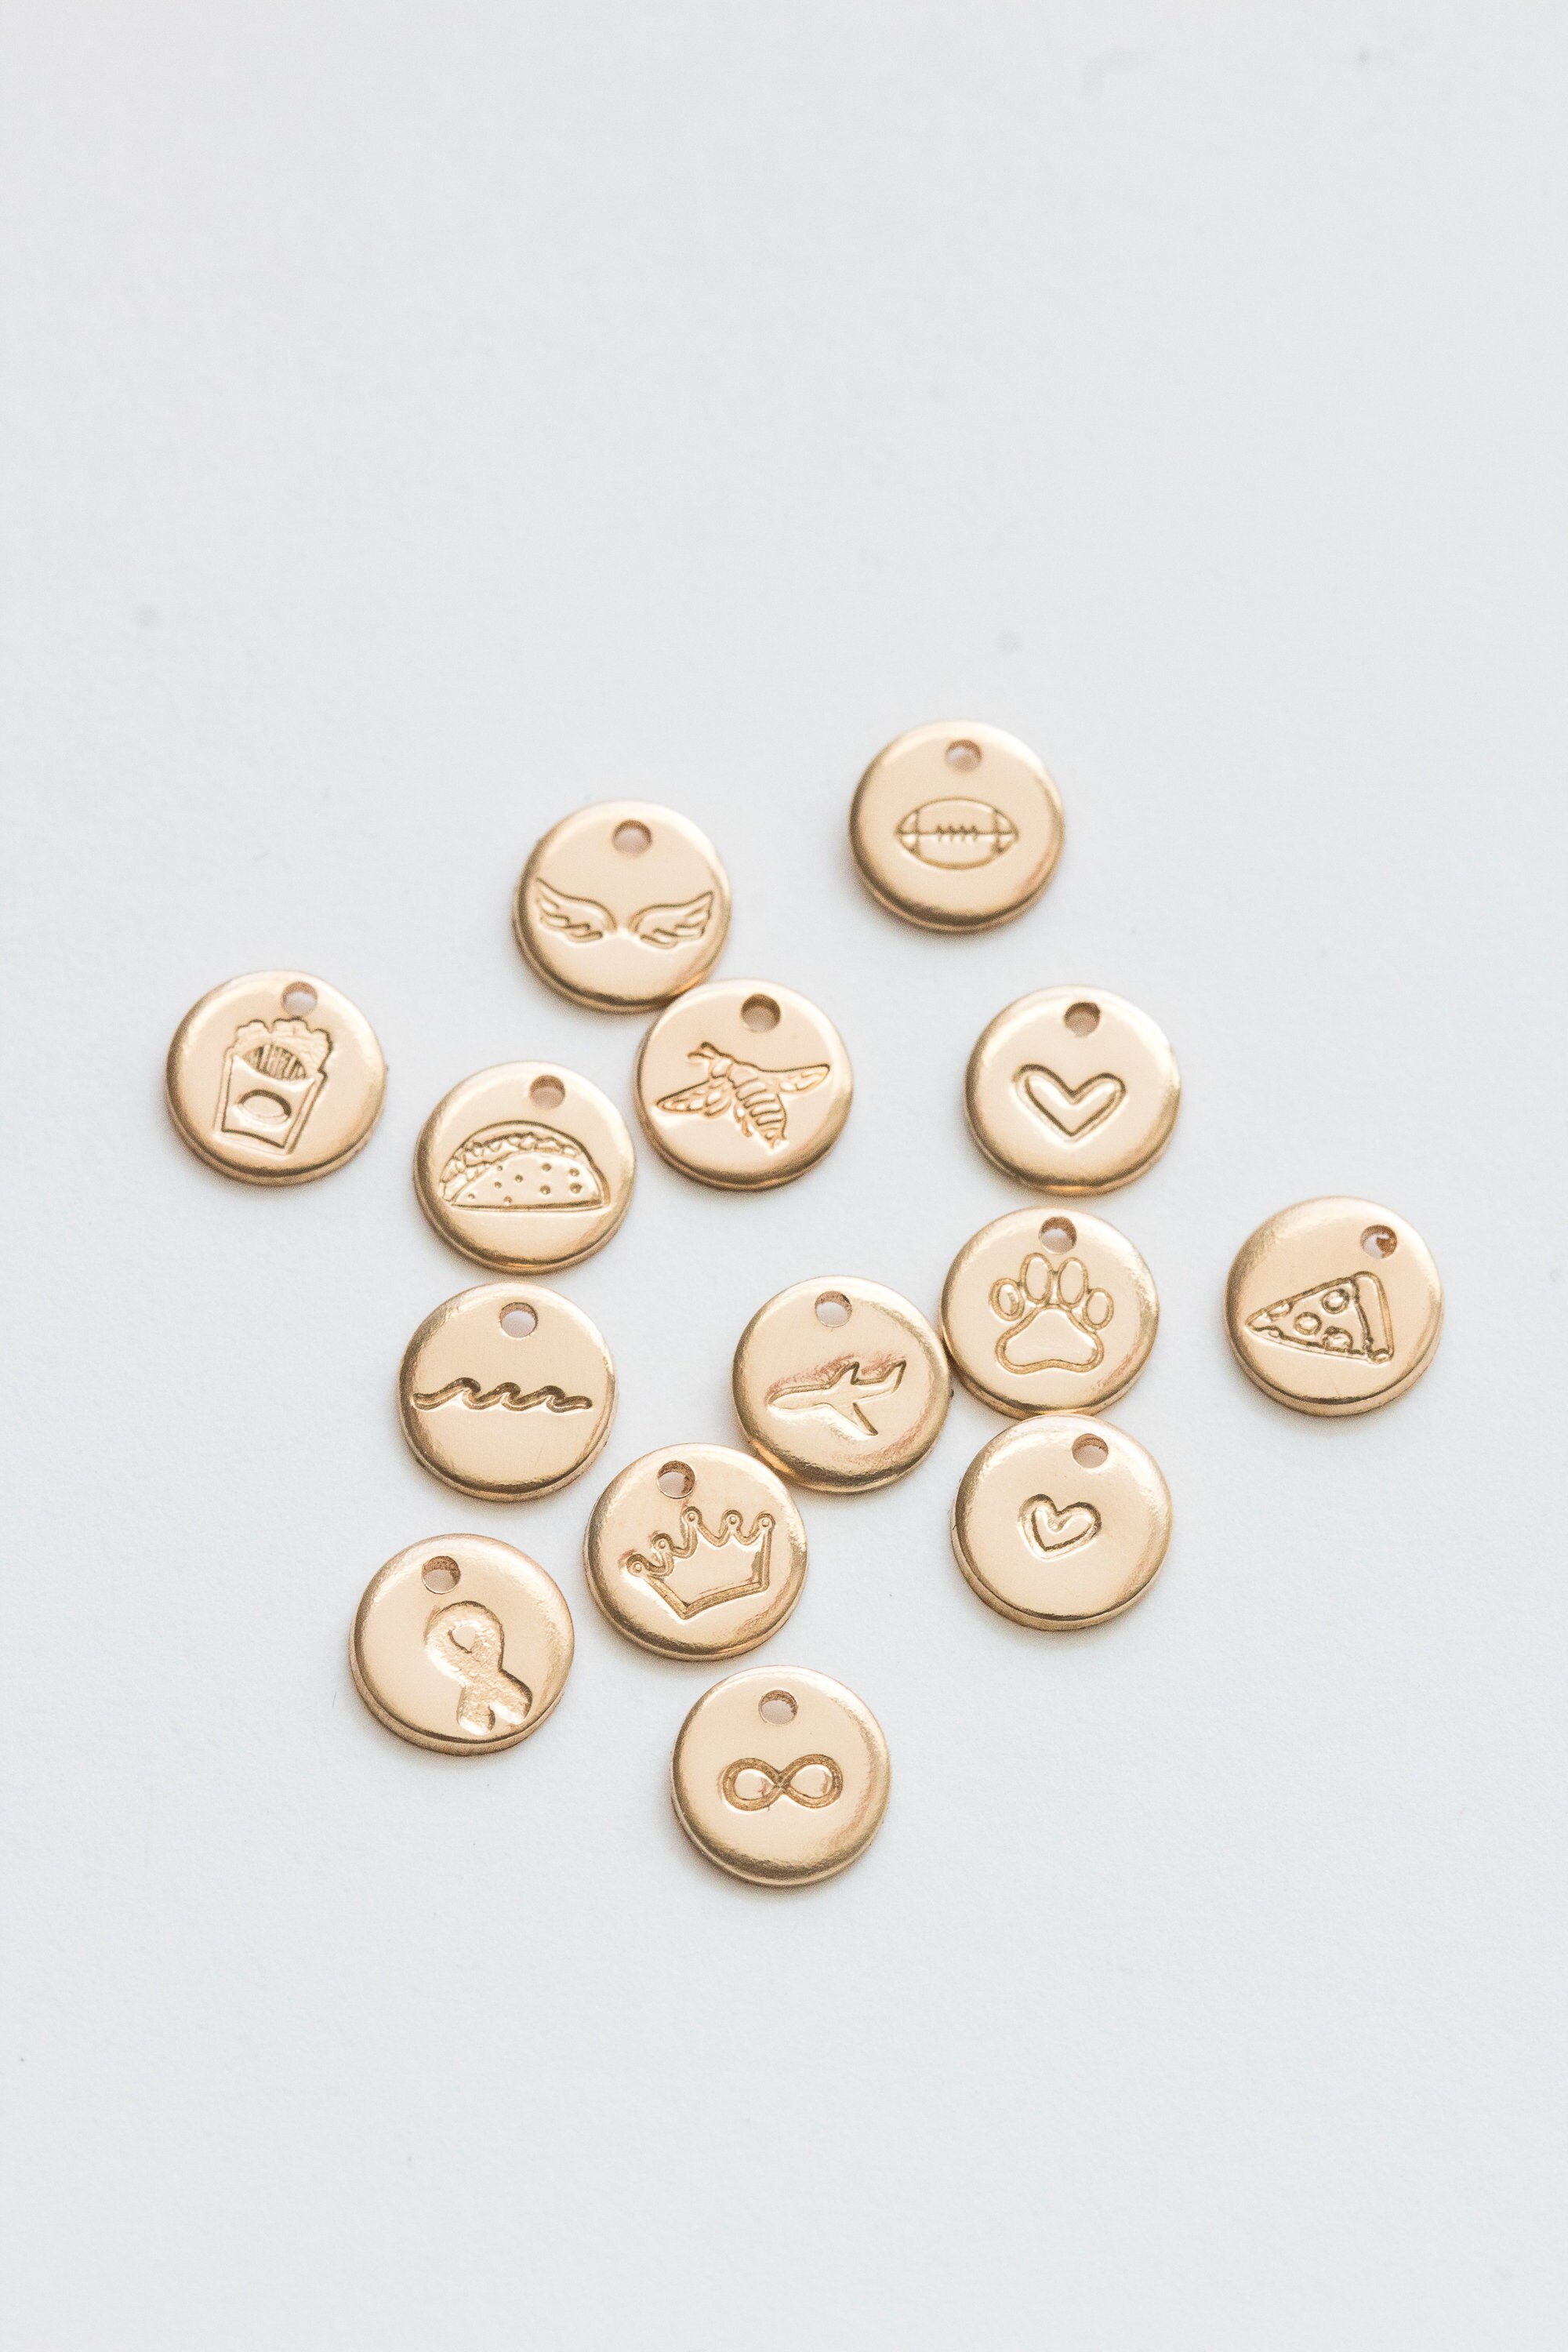 25pcs/Bag 12x9mm Believe In Love Heart Charms For DIY Jewelry